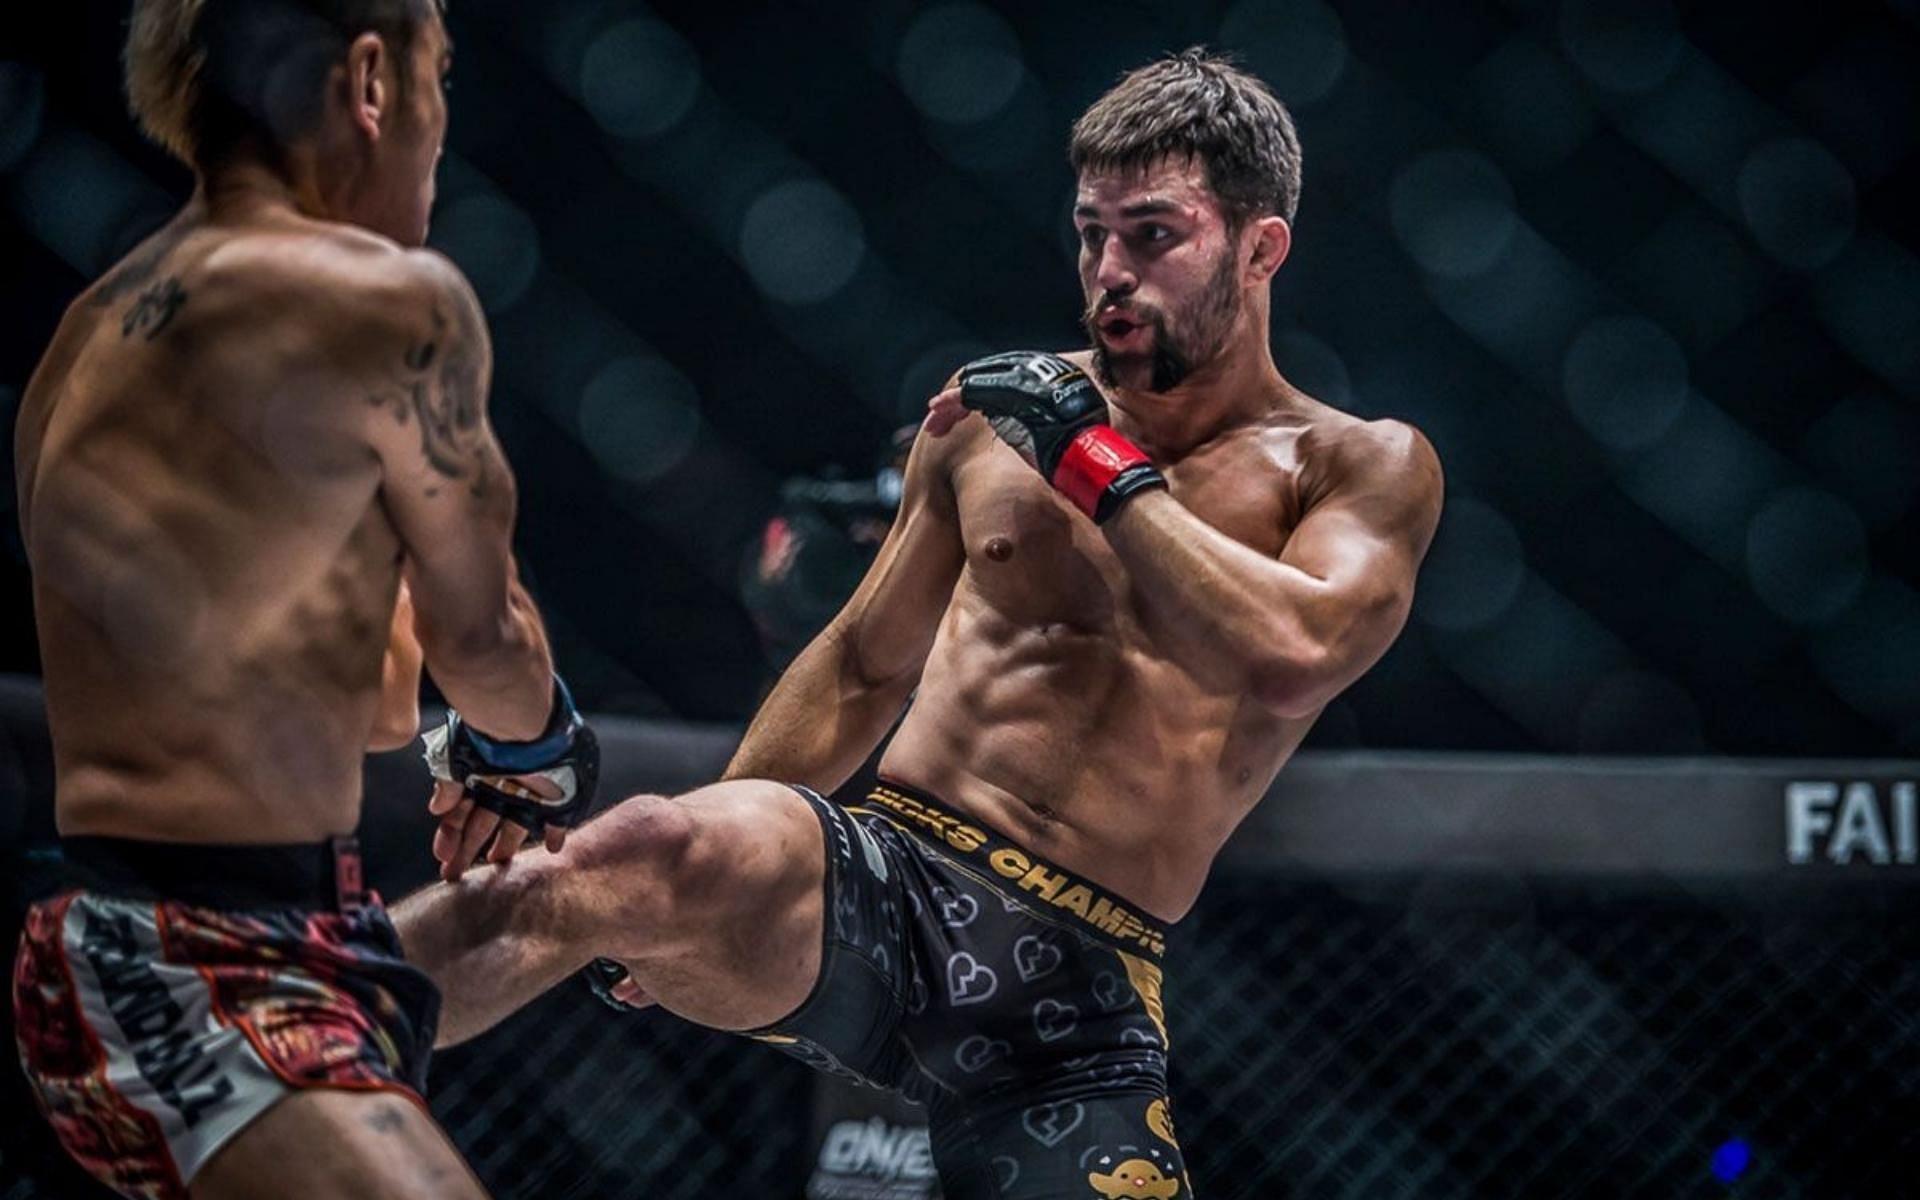 ONE Championship featherweight Garry Tonon (right) is one of the most well-known undefeated fighters in MMA today. (Image courtesy of ONE Championship)